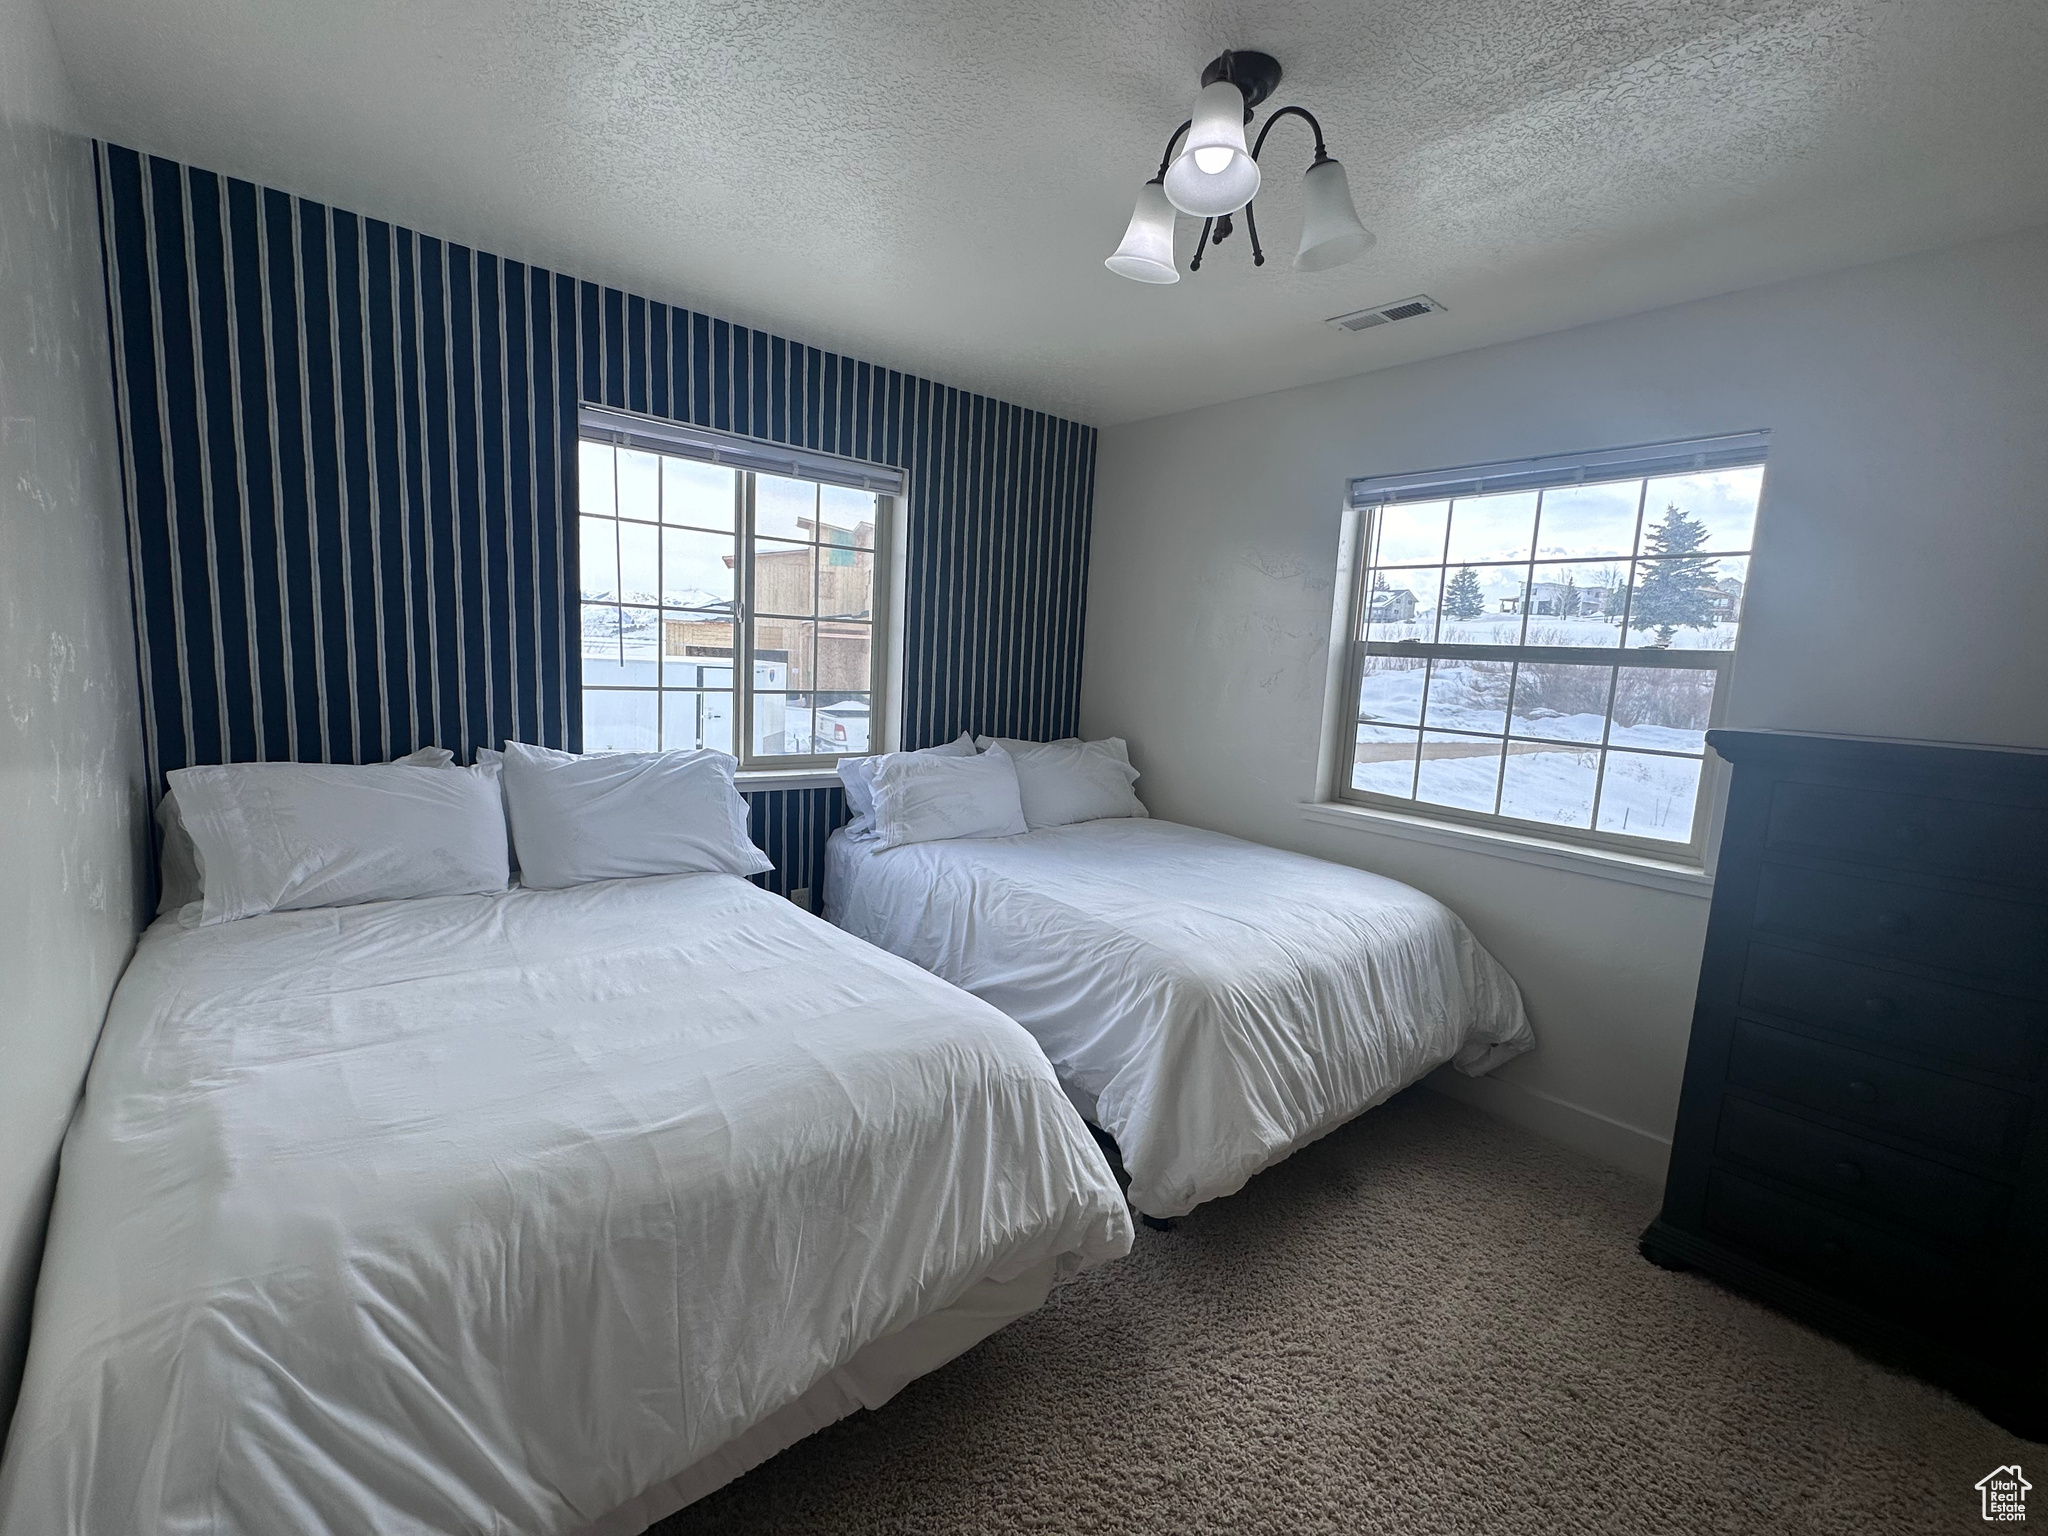 Carpeted bedroom featuring multiple windows, and ceiling fan